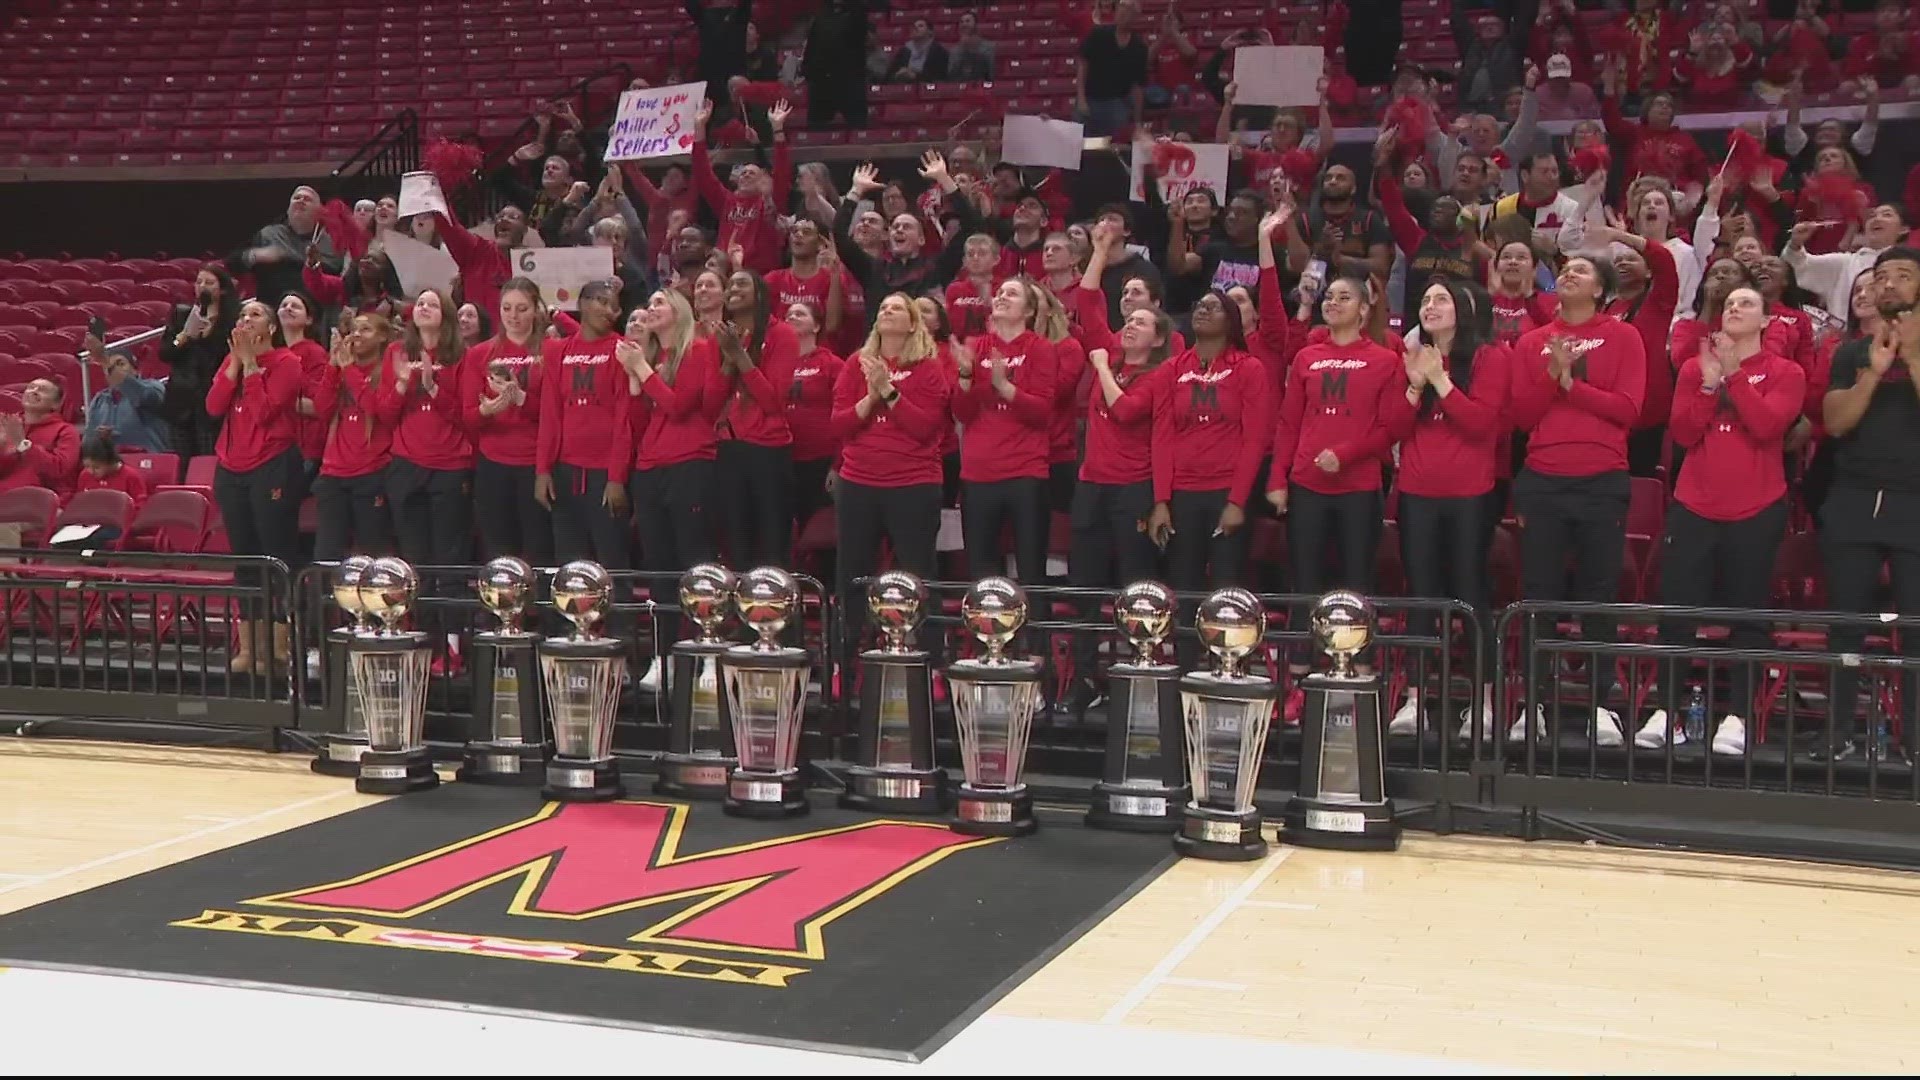 The Maryland women tipoff as a No. 2 seed in the tournament